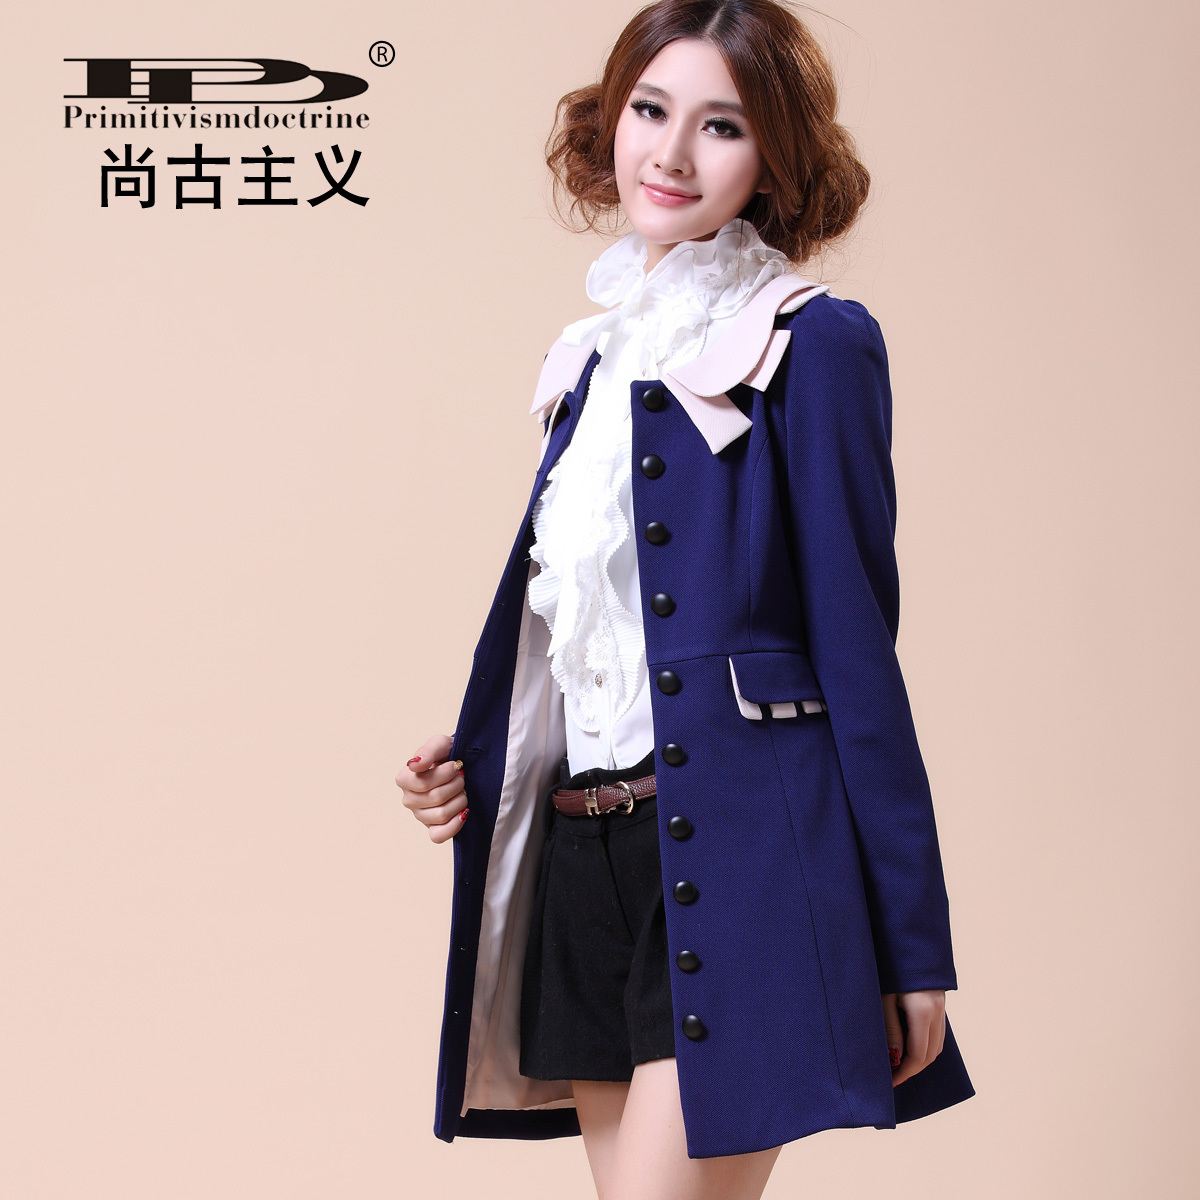 2013 spring and autumn trench vintage british style double collar long design single breasted